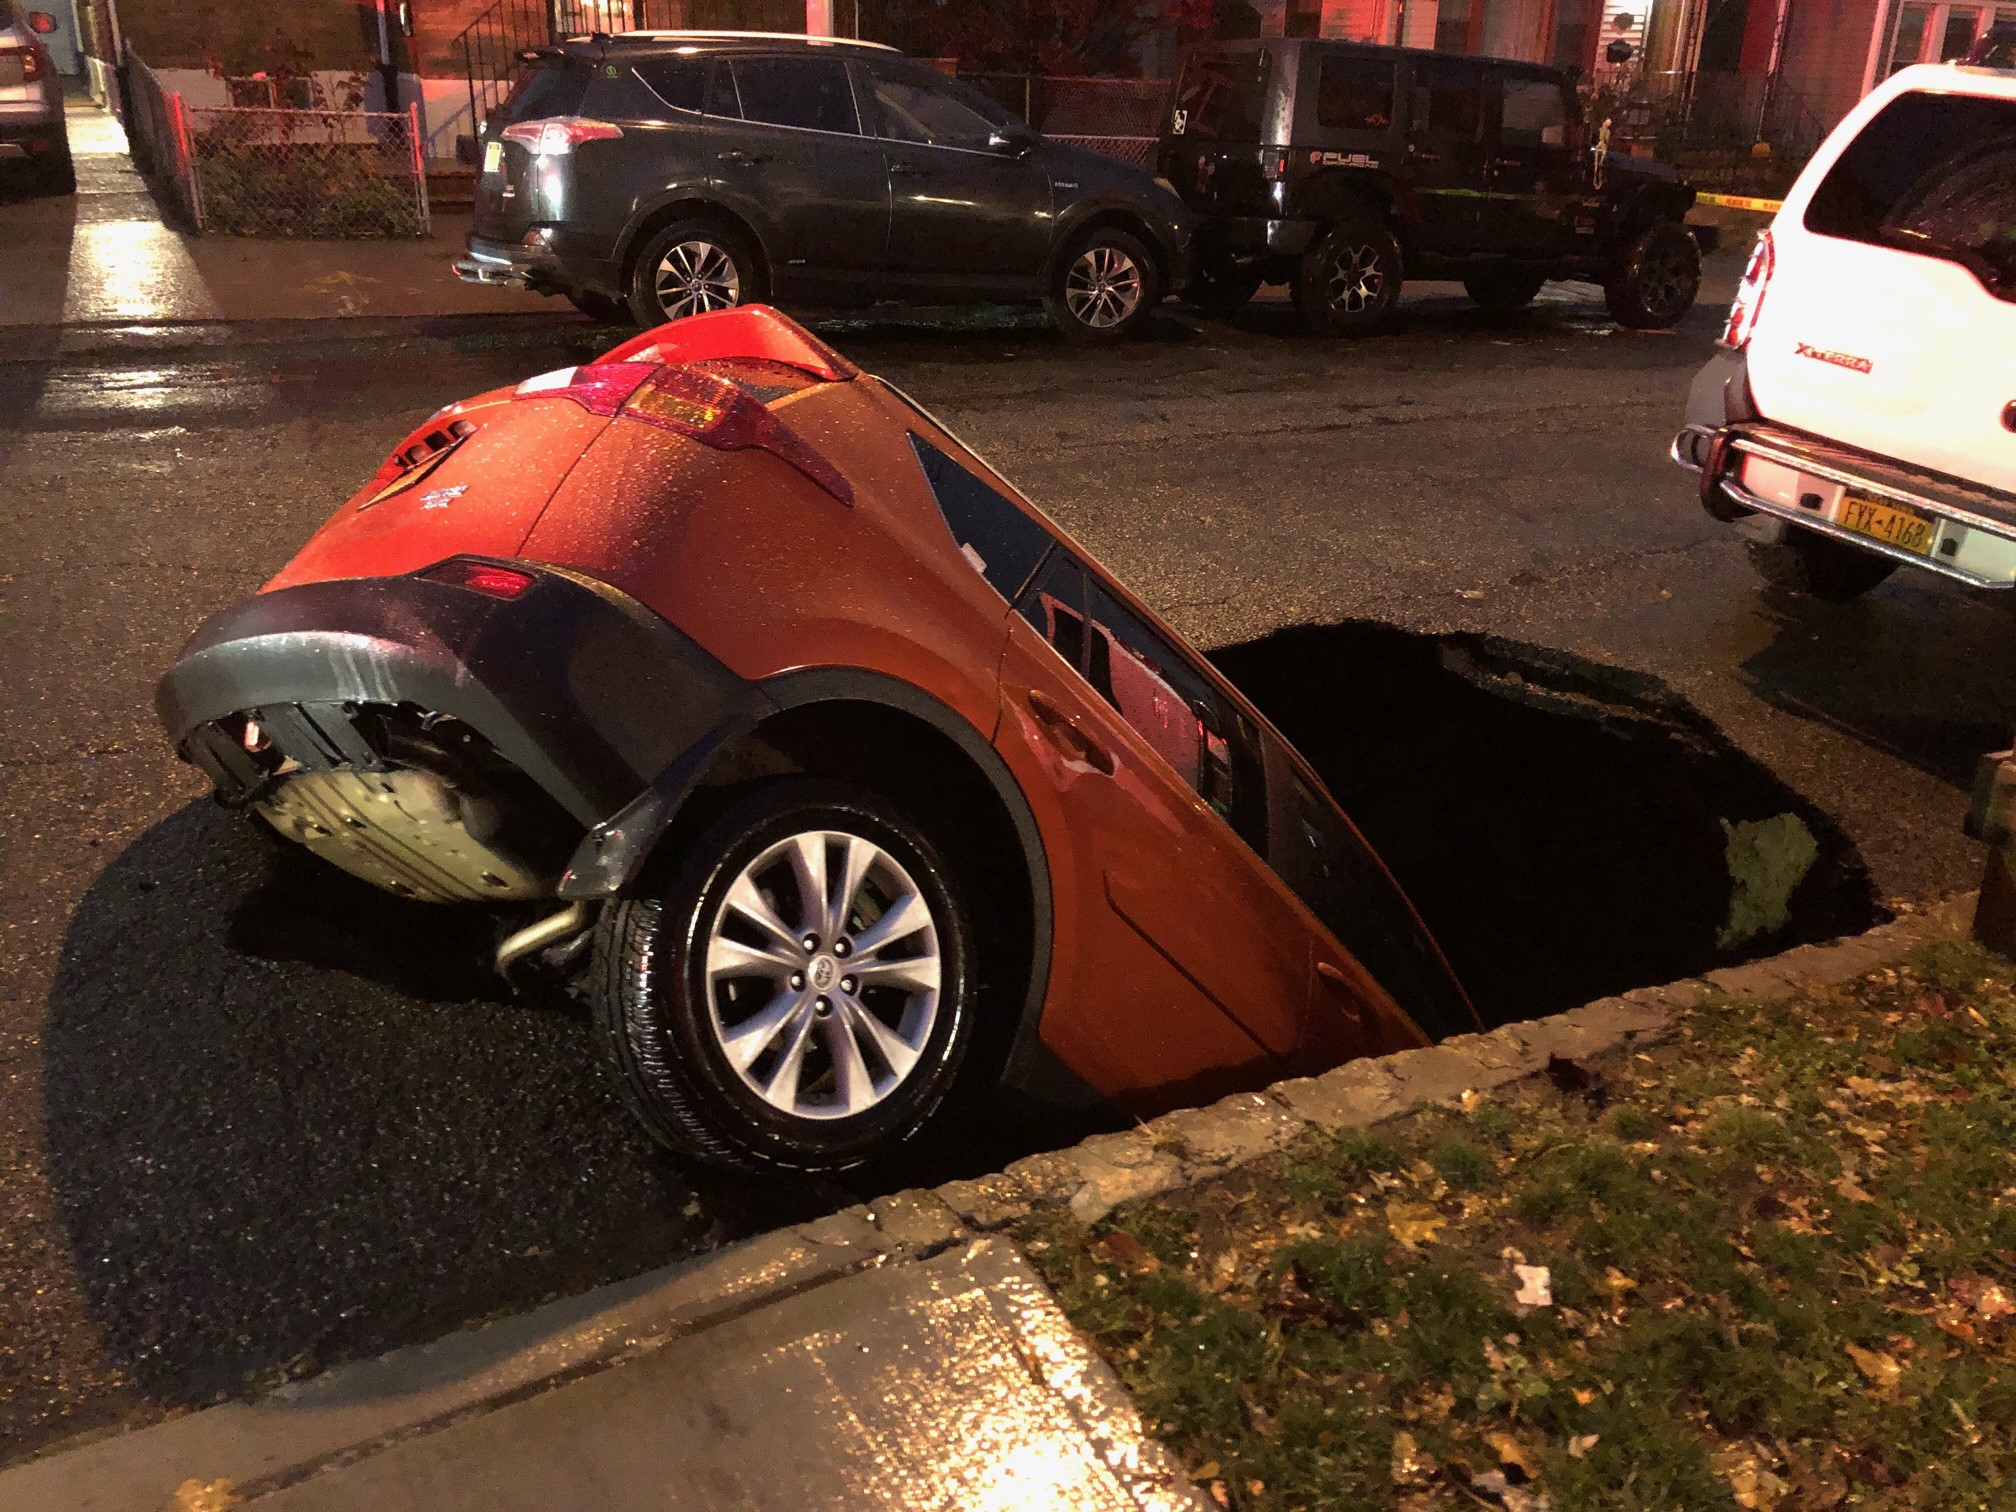 An orange vehicle is submerged in a sinkhole at a residential street in Queens on Thanksgiving.